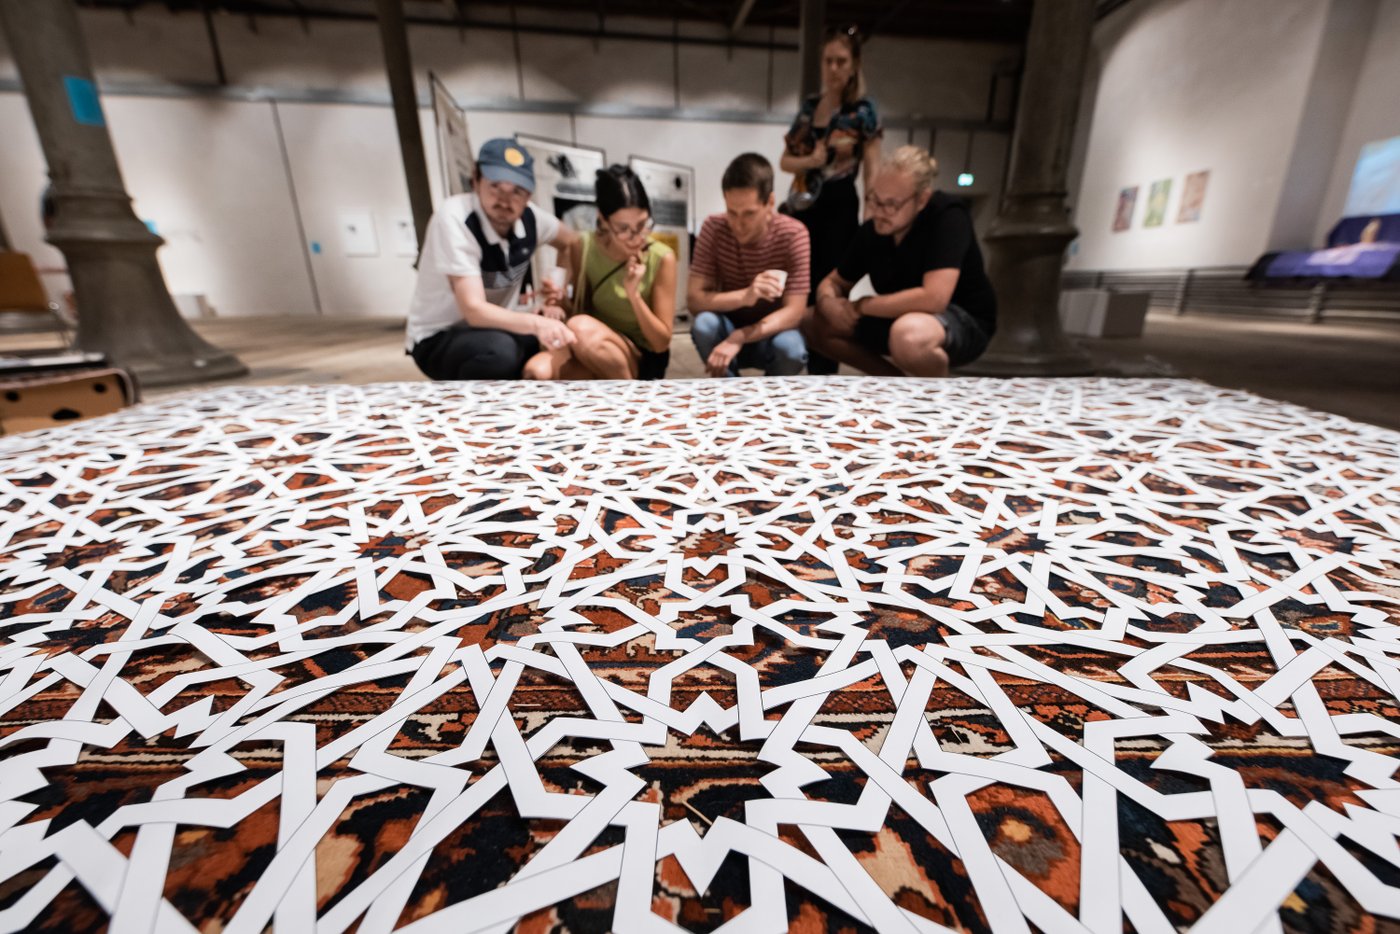 People looking on the artistic carpet with white cut-out on the floor